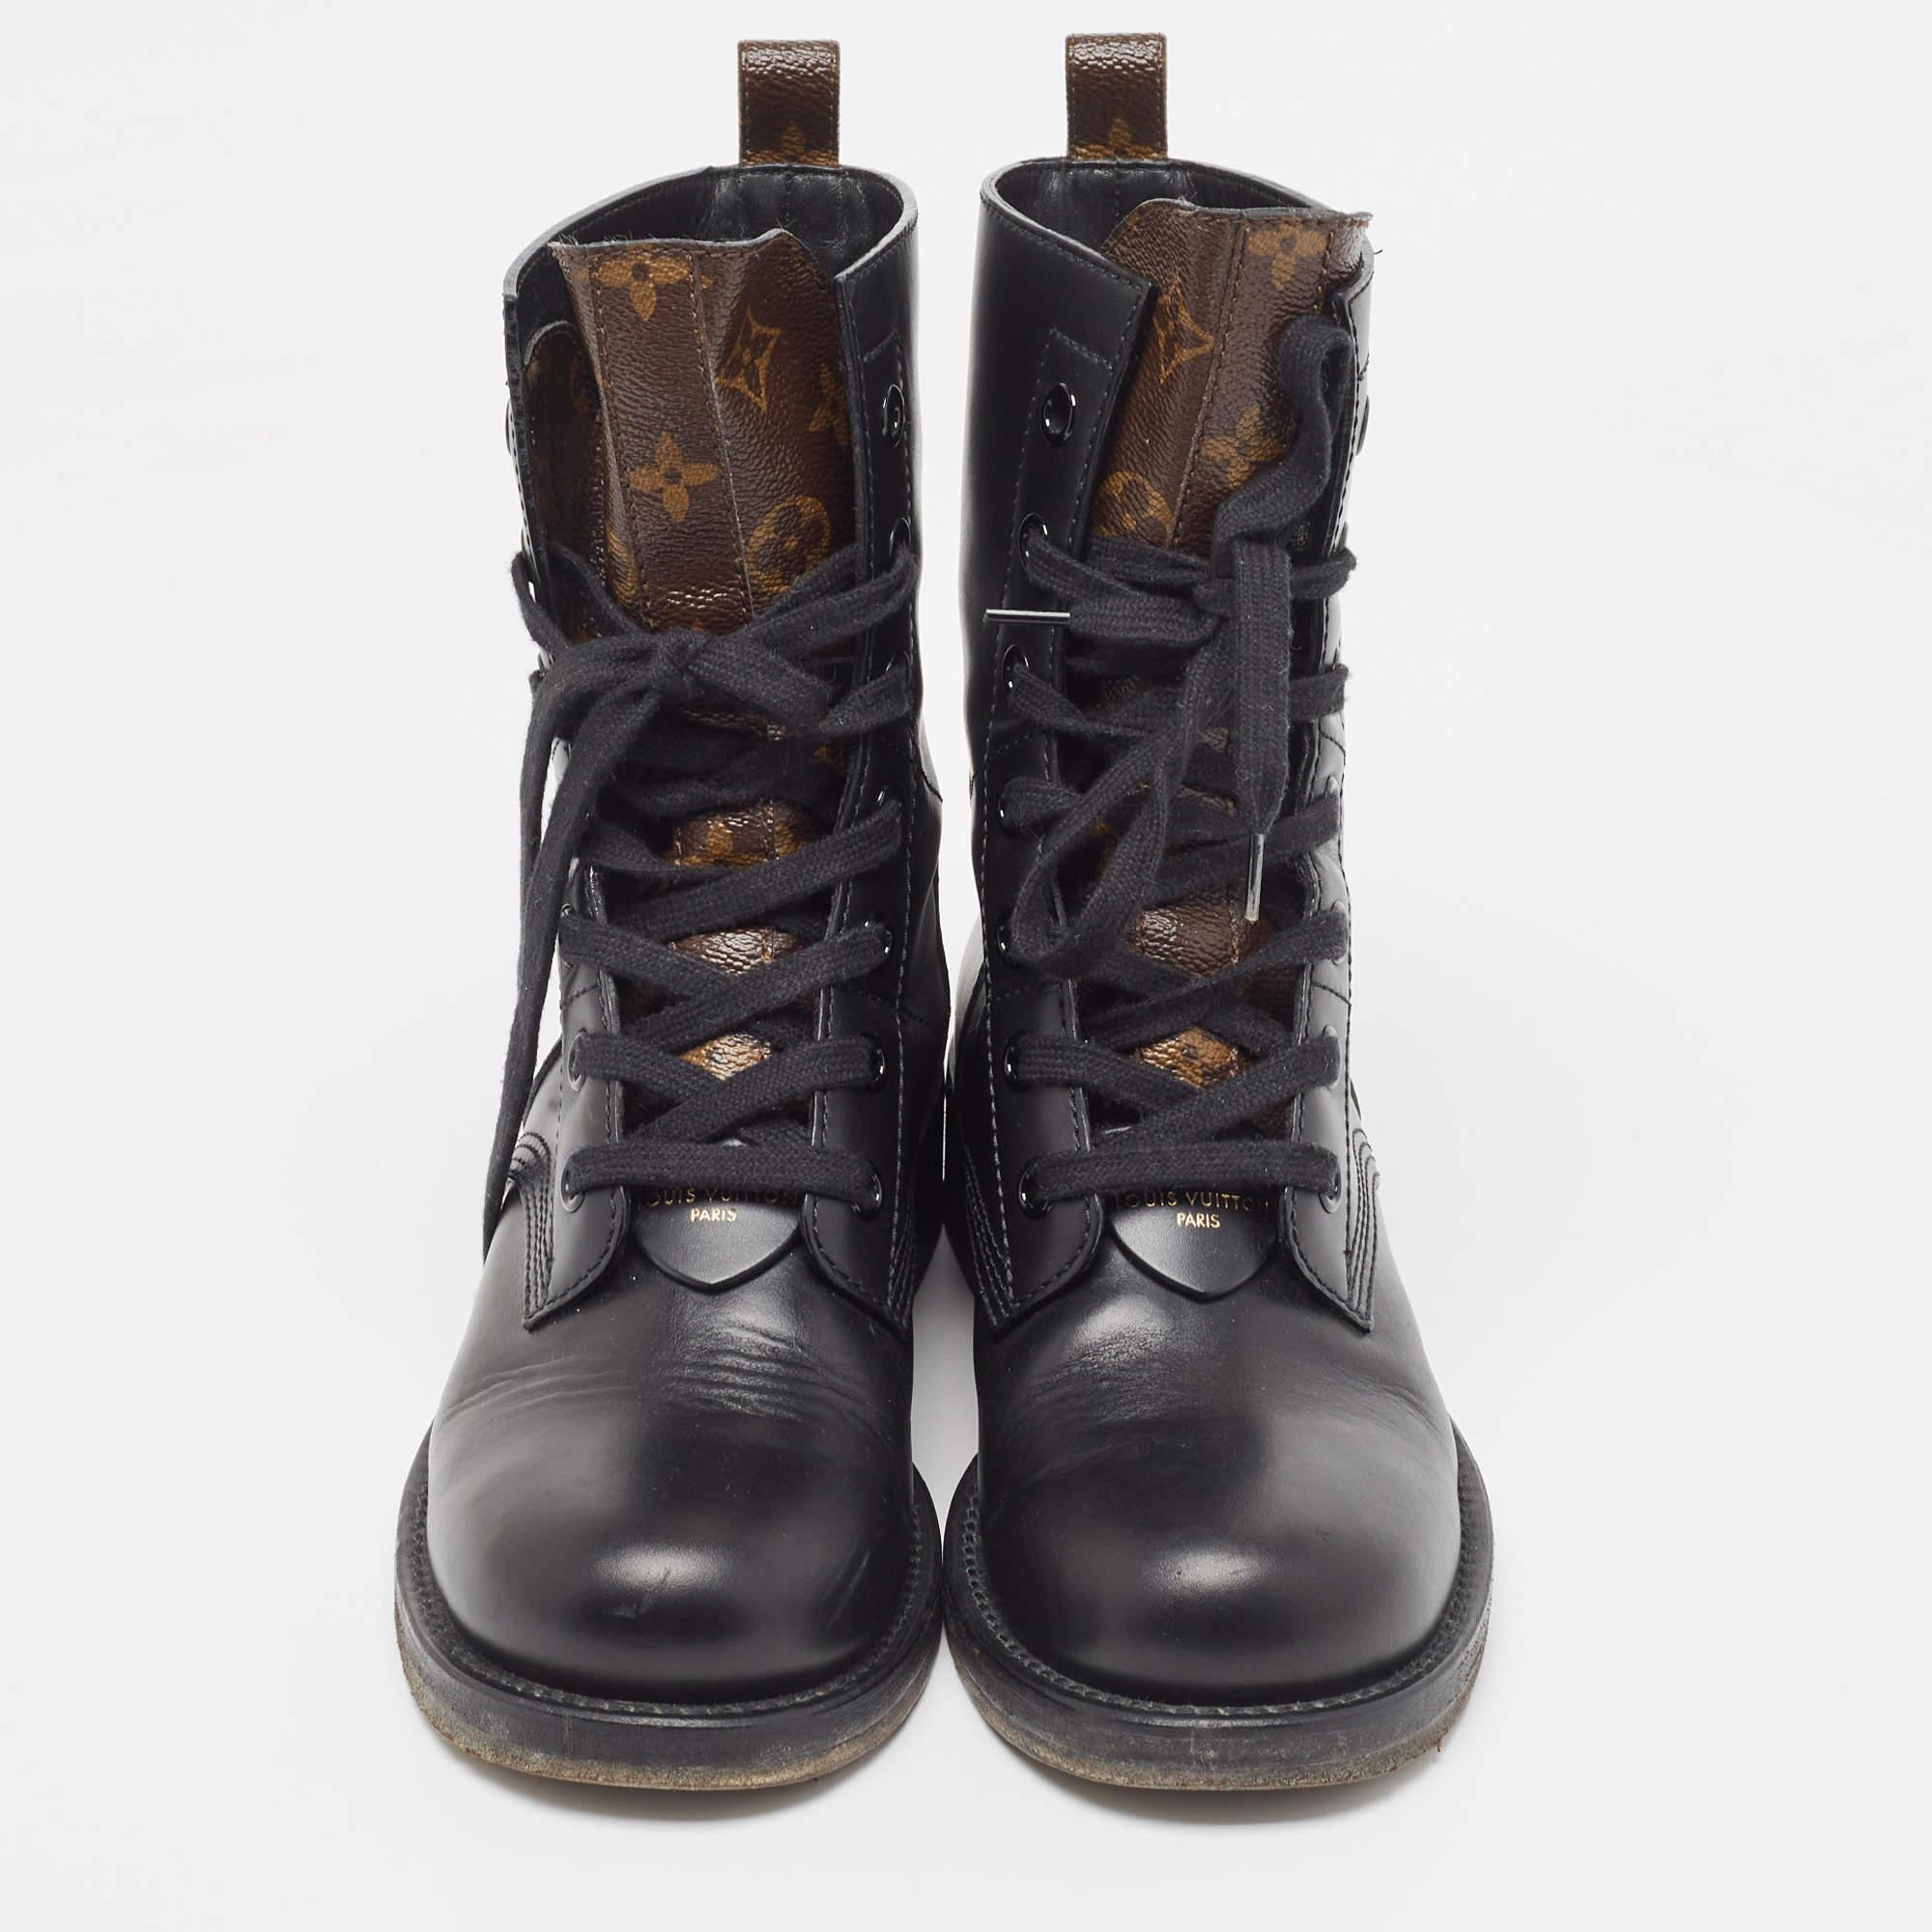 A sleek design amplified by skillful craftsmanship, these Ranger boots from Louis Vuitton assure comfortable fashion. They are sewn using leather and feature Monogram canvas panels, lace-up detailing, and sturdy soles.

Includes: Original Dustbag

